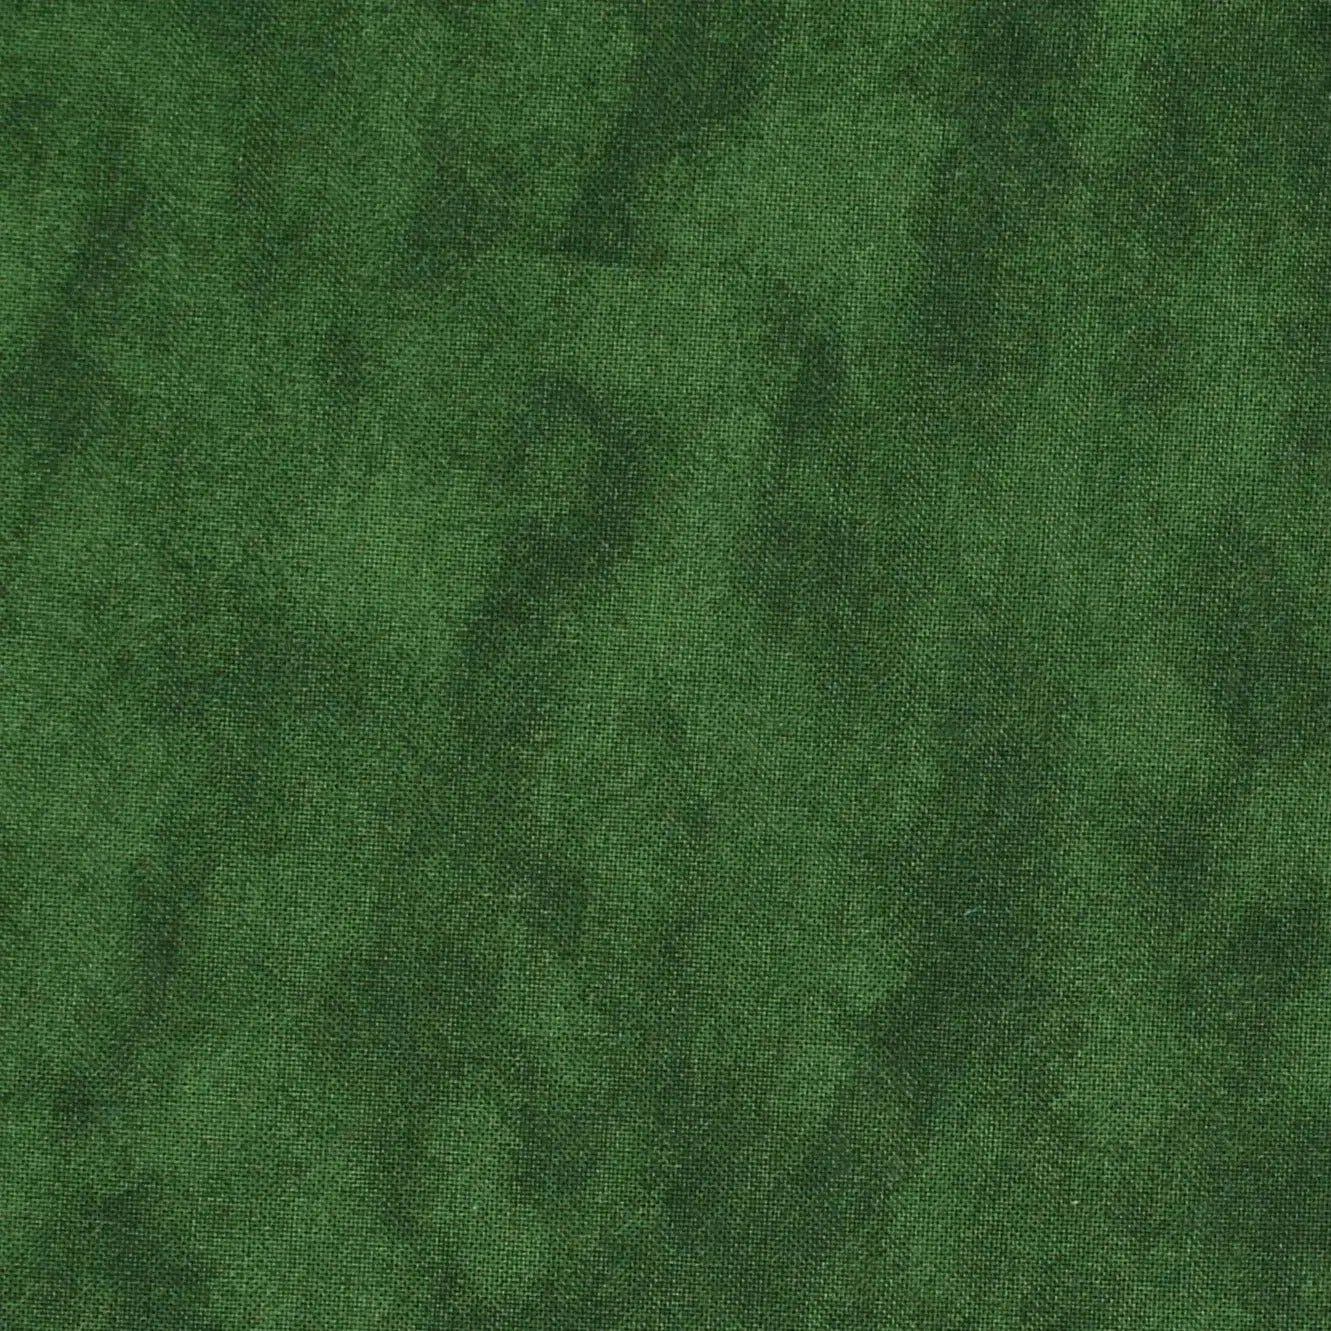 Green Hunter Color Waves Cotton Wideback Fabric ( 1/2 Yard Pack )